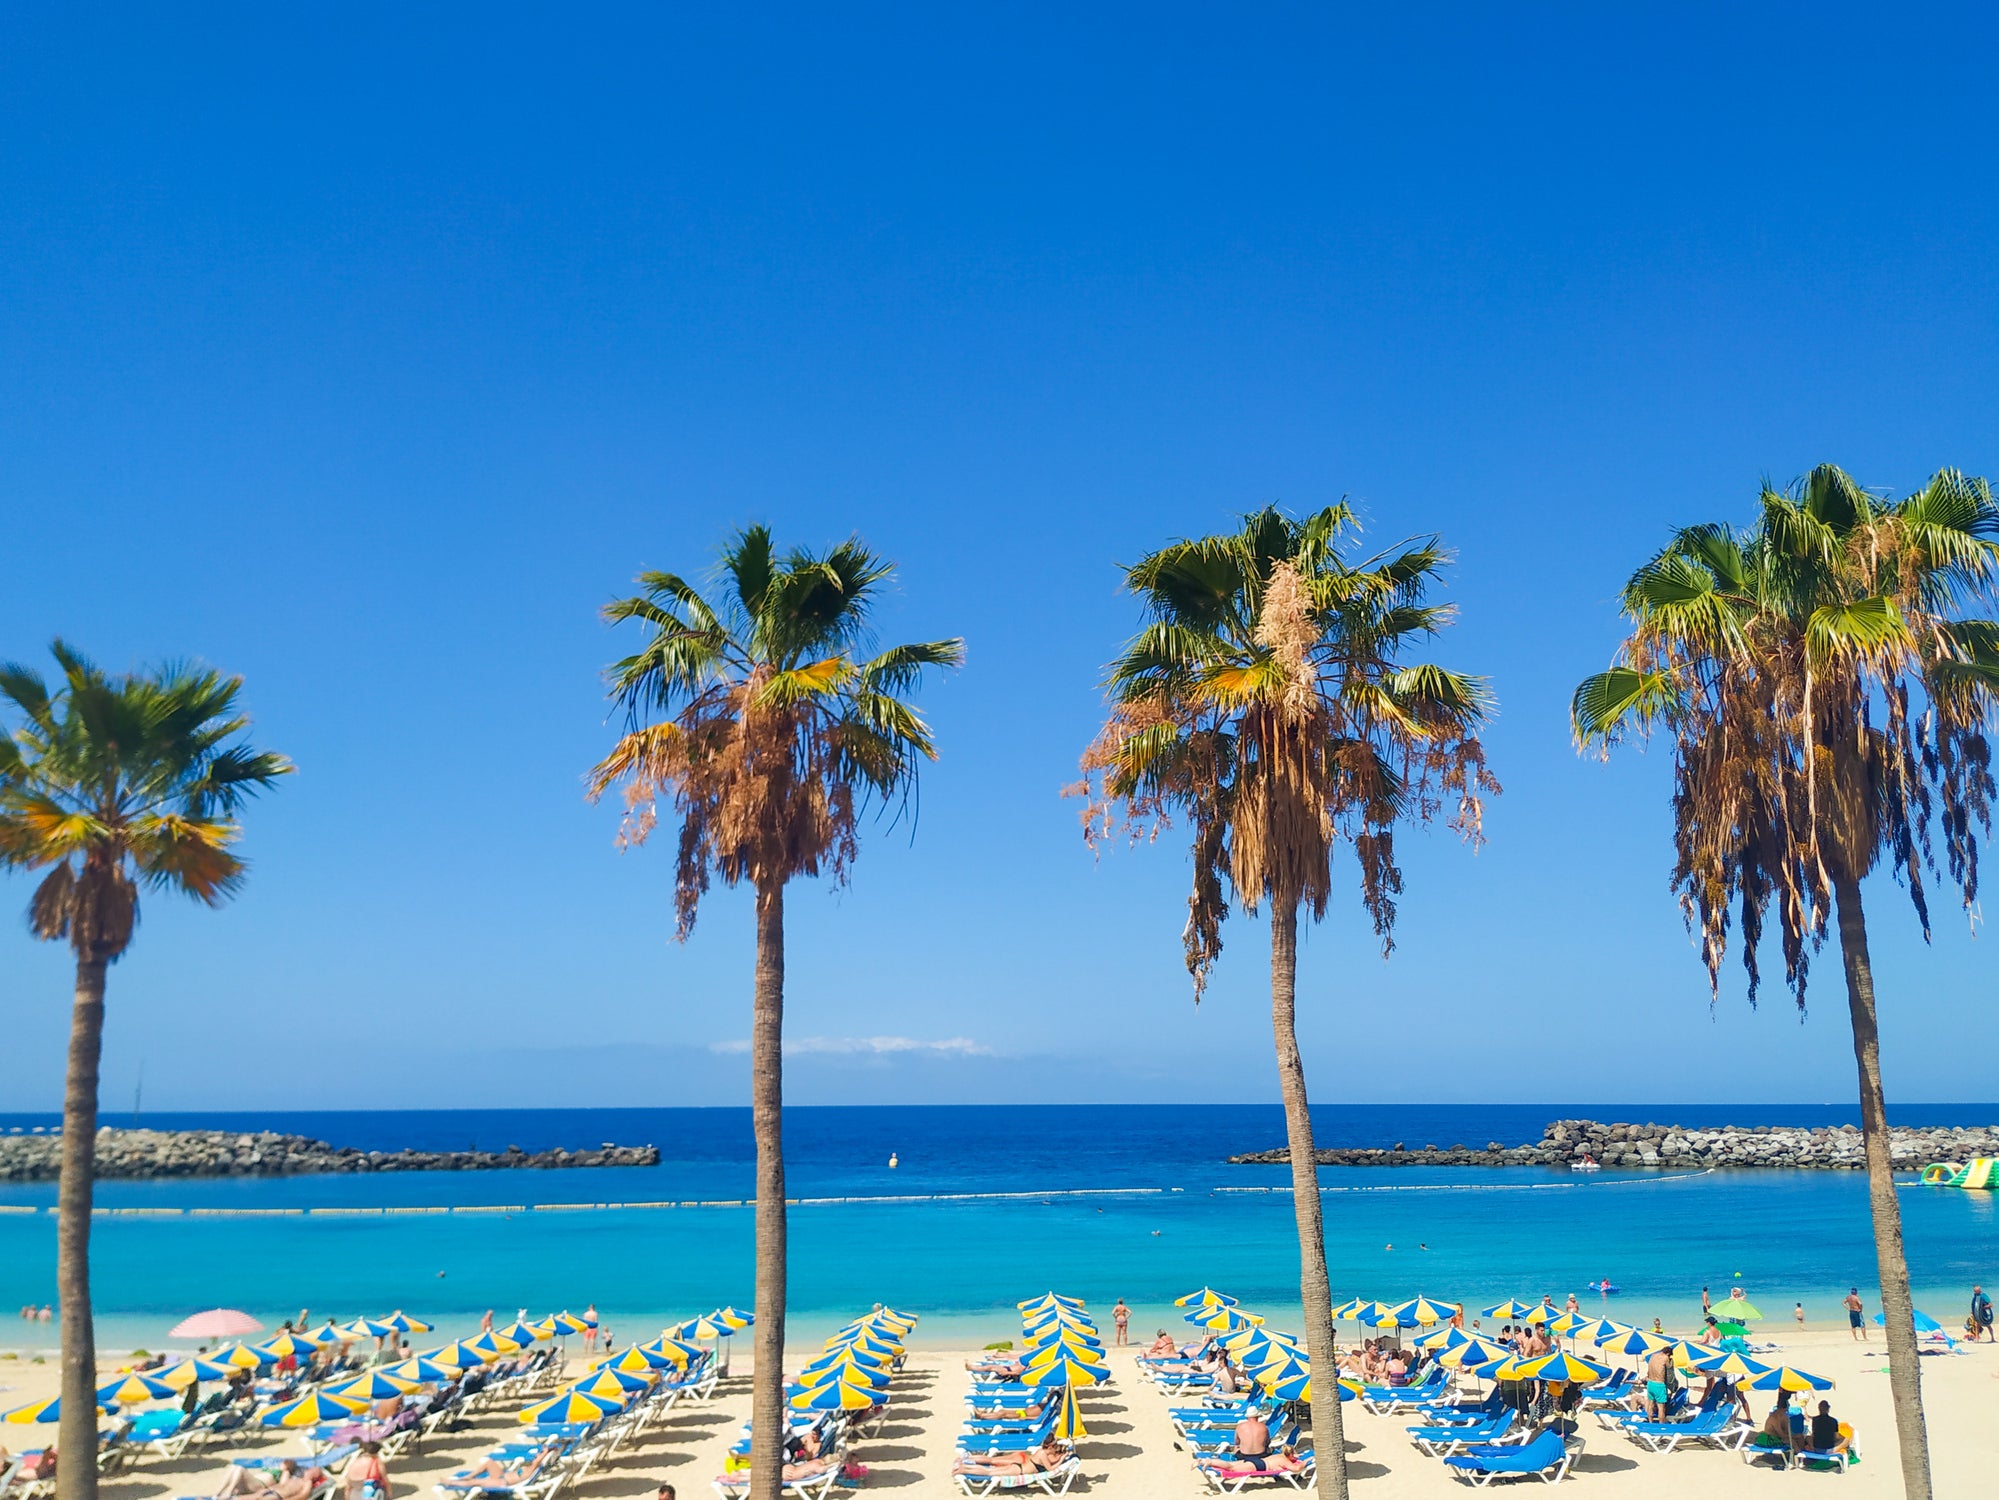 Your vacation guide to Gran Canaria, Canary Islands